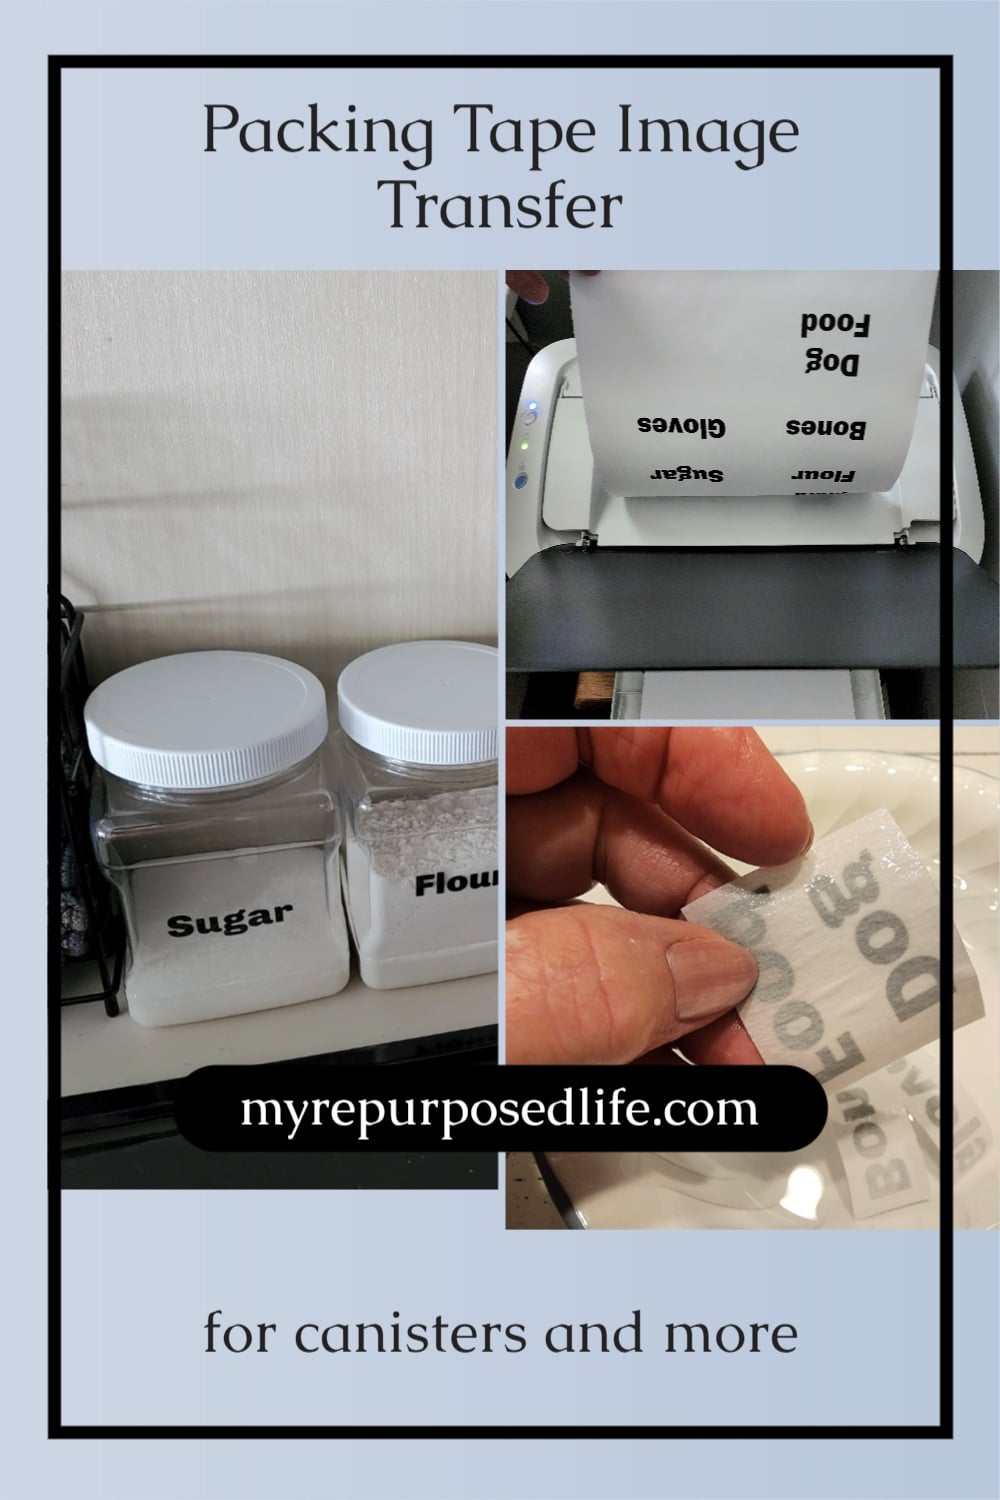 Did you know that you can make your own stickers using packing tape? Yes! Make customized packing tape image transfer stickers on your home computer and printer. #MyRepurposedLife via @repurposedlife